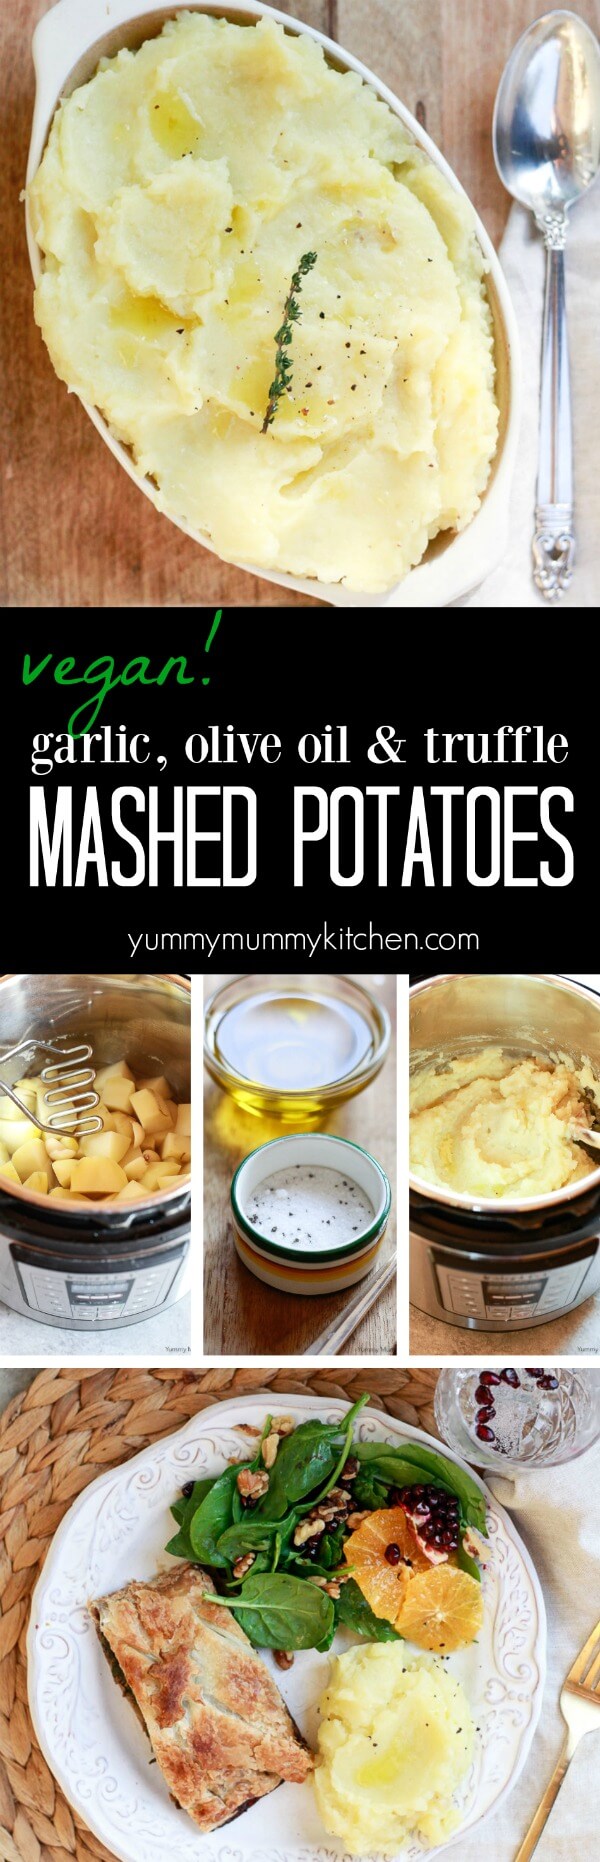 The best vegan mashed potatoes made in the Instant Pot pressure cooker or the stovetop! These mashed potatoes are decadently flavored with garlic, olive oil, and truffles, so you won't miss the dairy. 